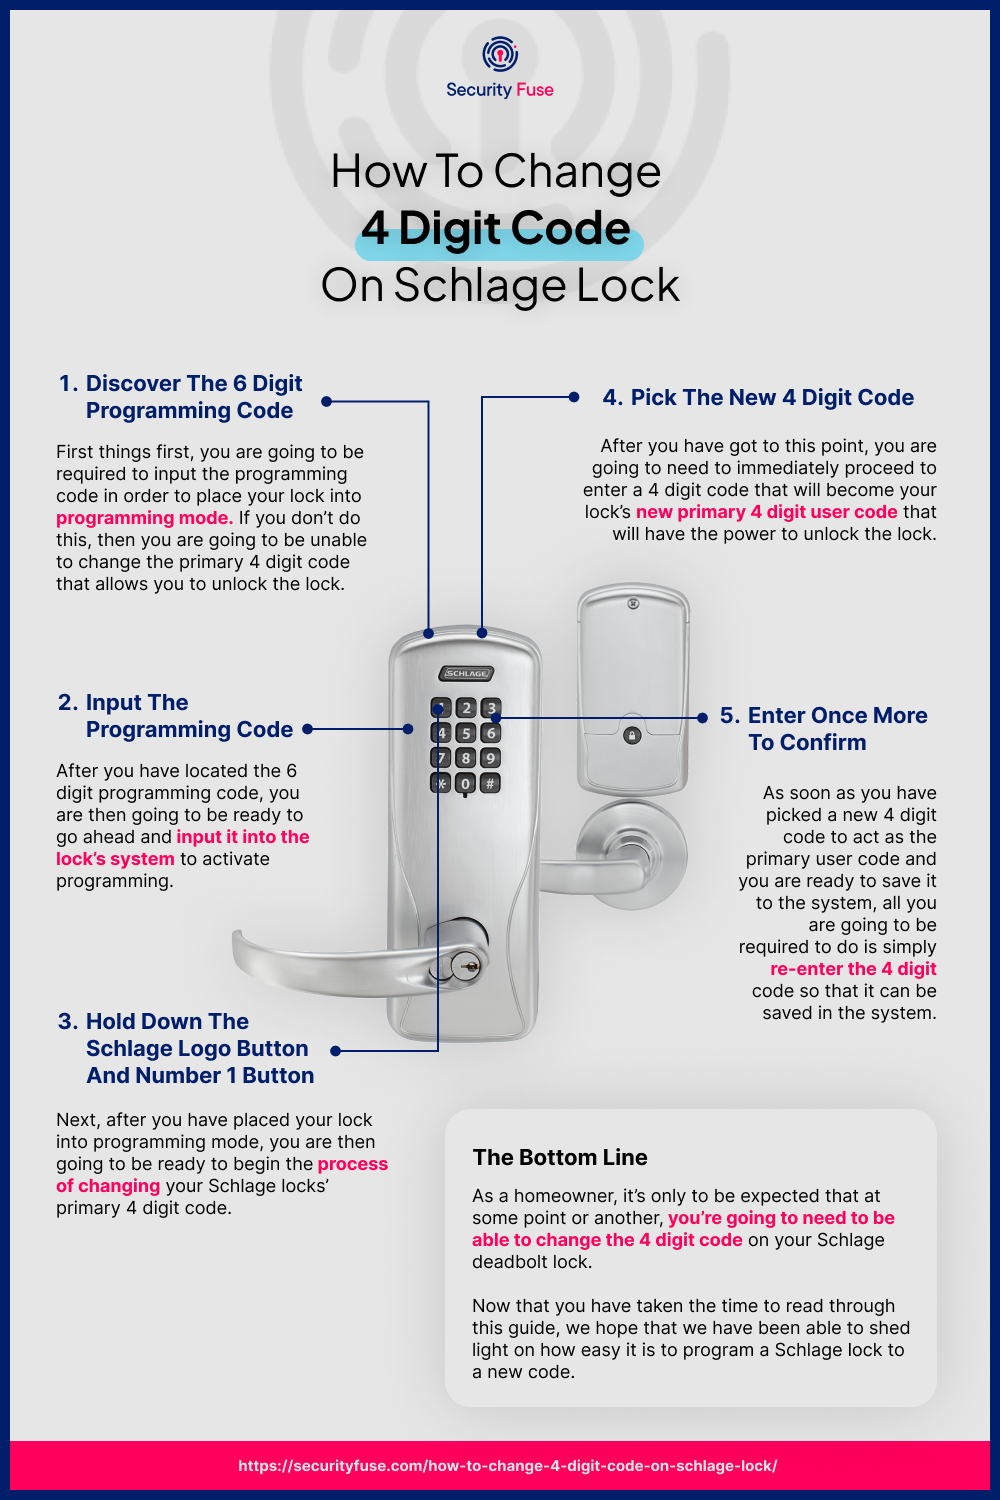 How To Change a 4 Digit Code On Schlage Lock